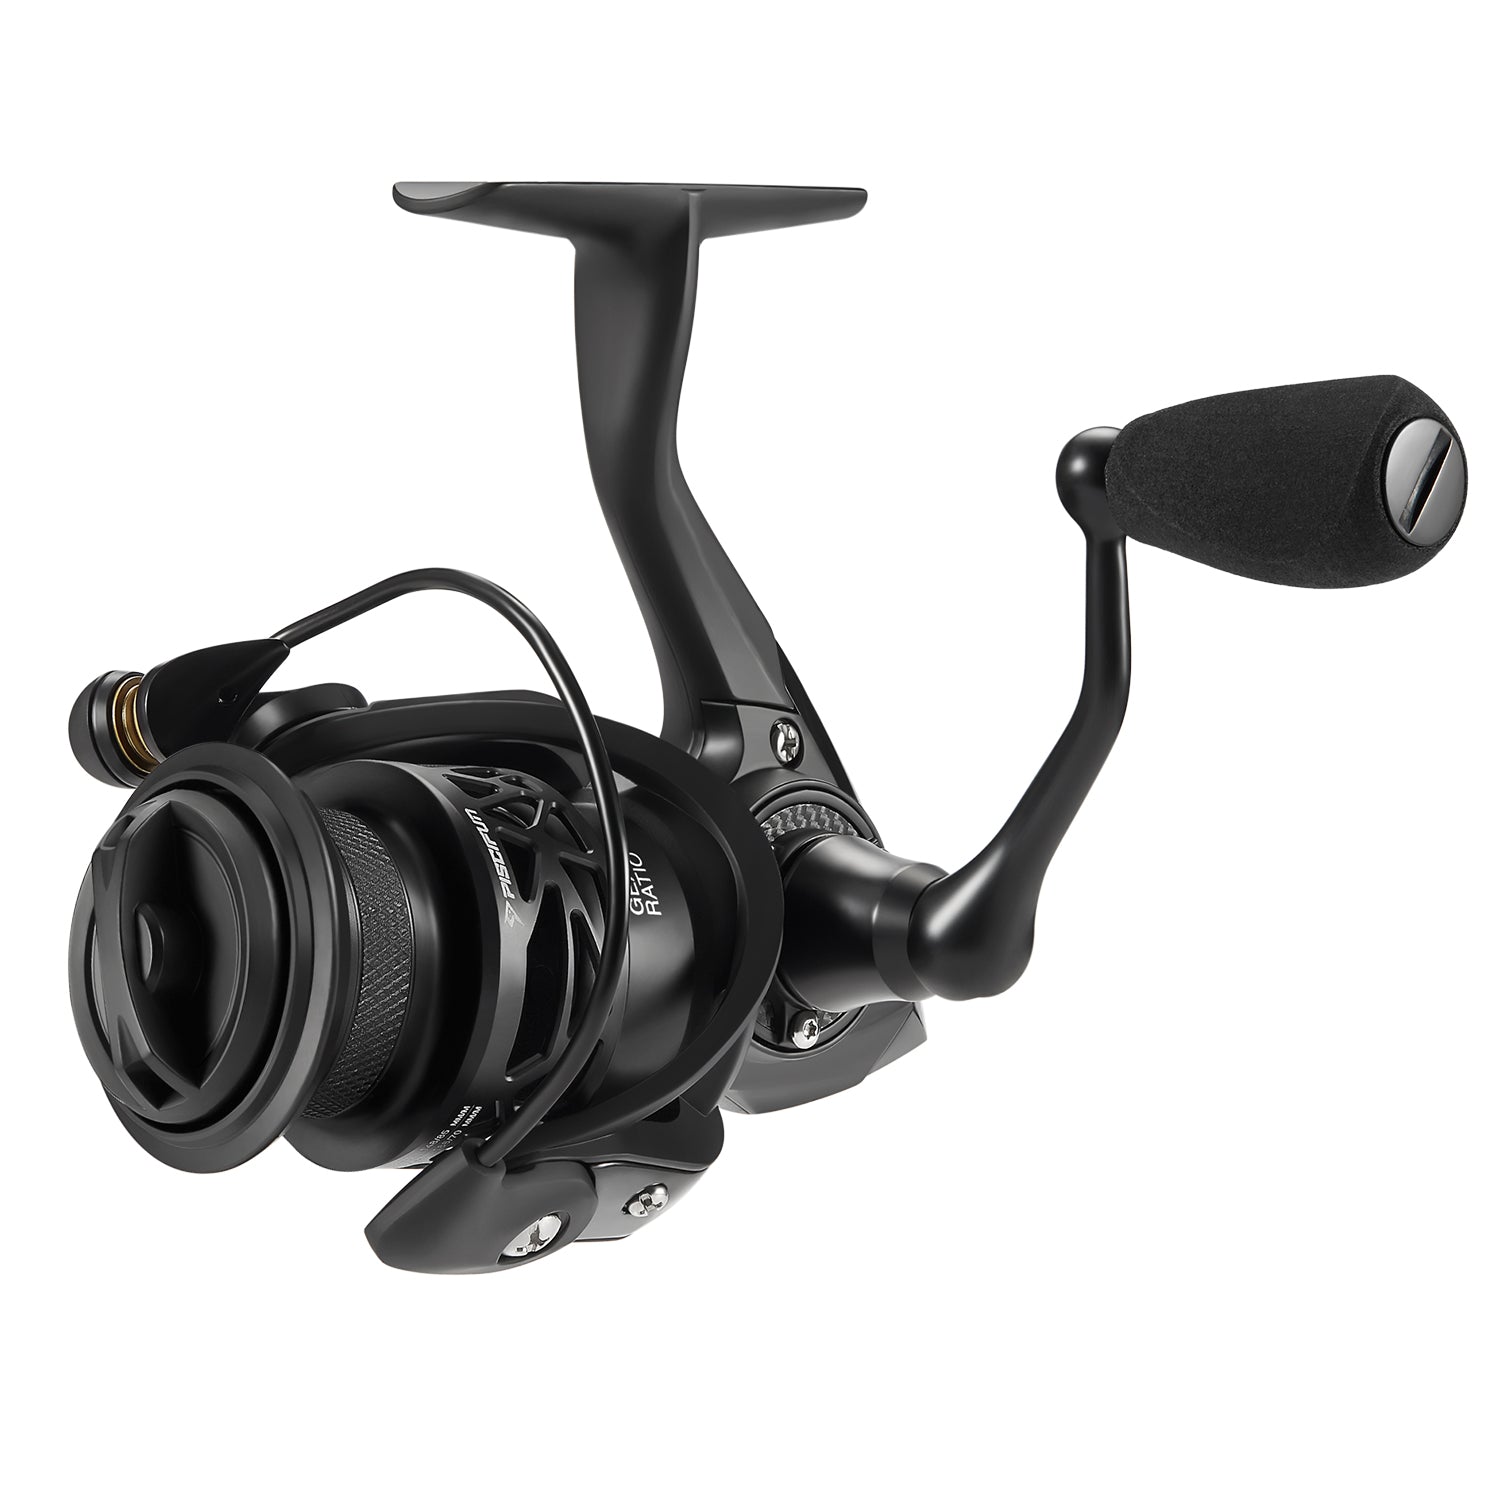 Piscifun Carbon X II Spinning Reels, Light to 5.5oz, Upgrade Carbon Frame  Rotor, 22LBs Max Drag, 10+1 Shielded BB, 6.2:1/5.2:1, Smooth Powerful